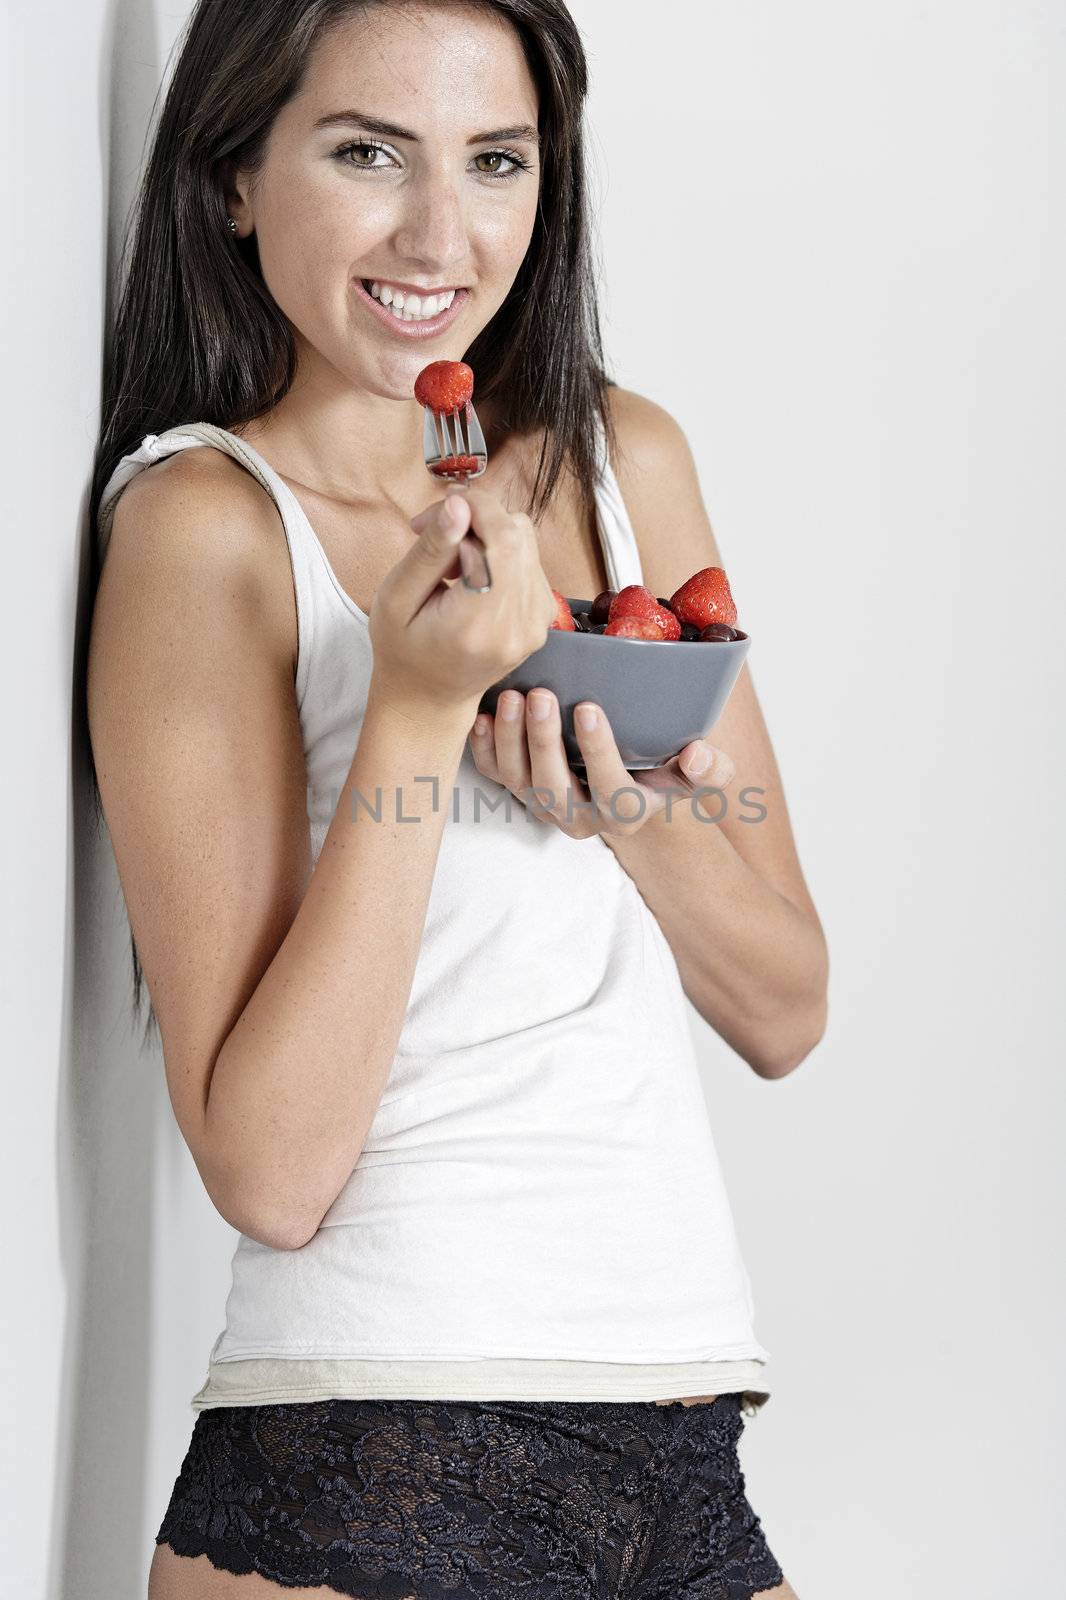 Beautiful young woman in underwear leaning against a wall enjoying a fruit salad